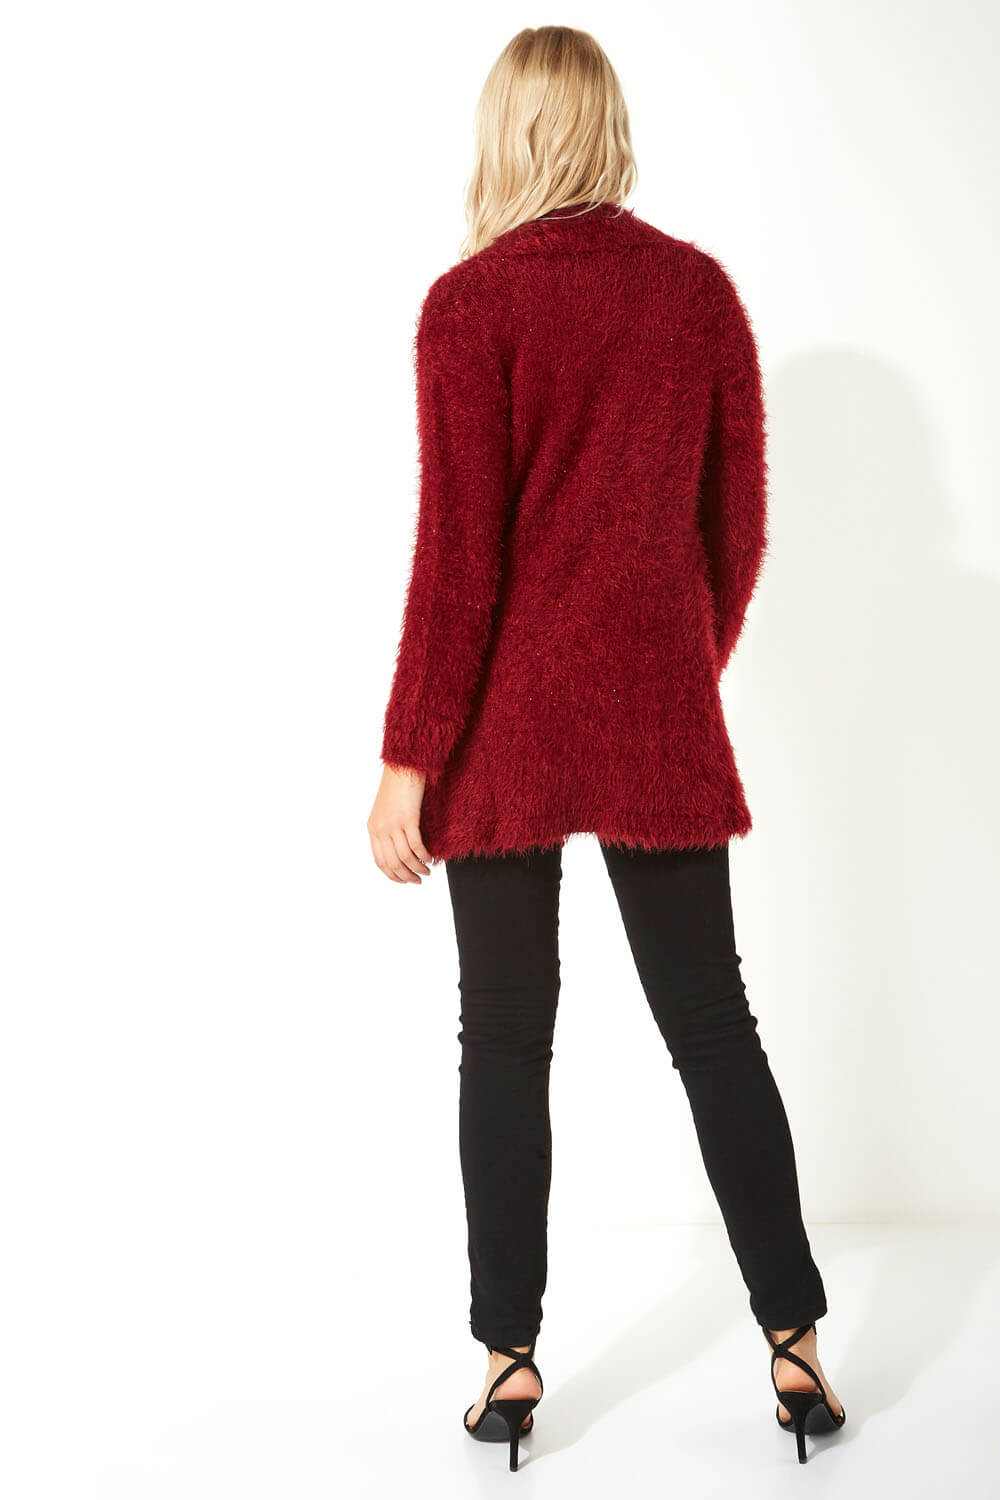 Bordeaux Fluffy Sequin Cardigan, Image 3 of 5